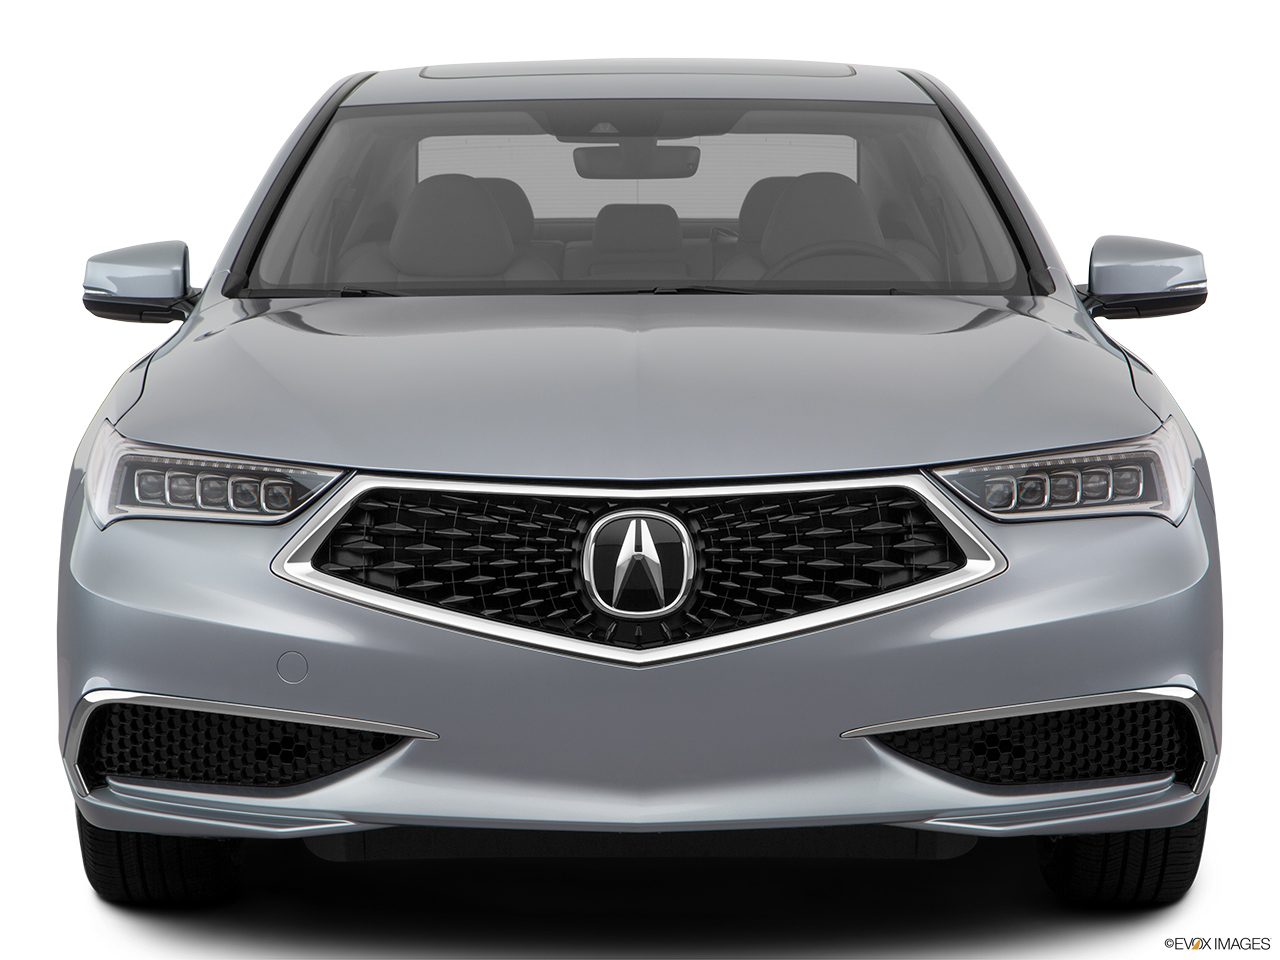 2019 Acura TLX 2.4 8-DCT P-AWS Low/wide front. 